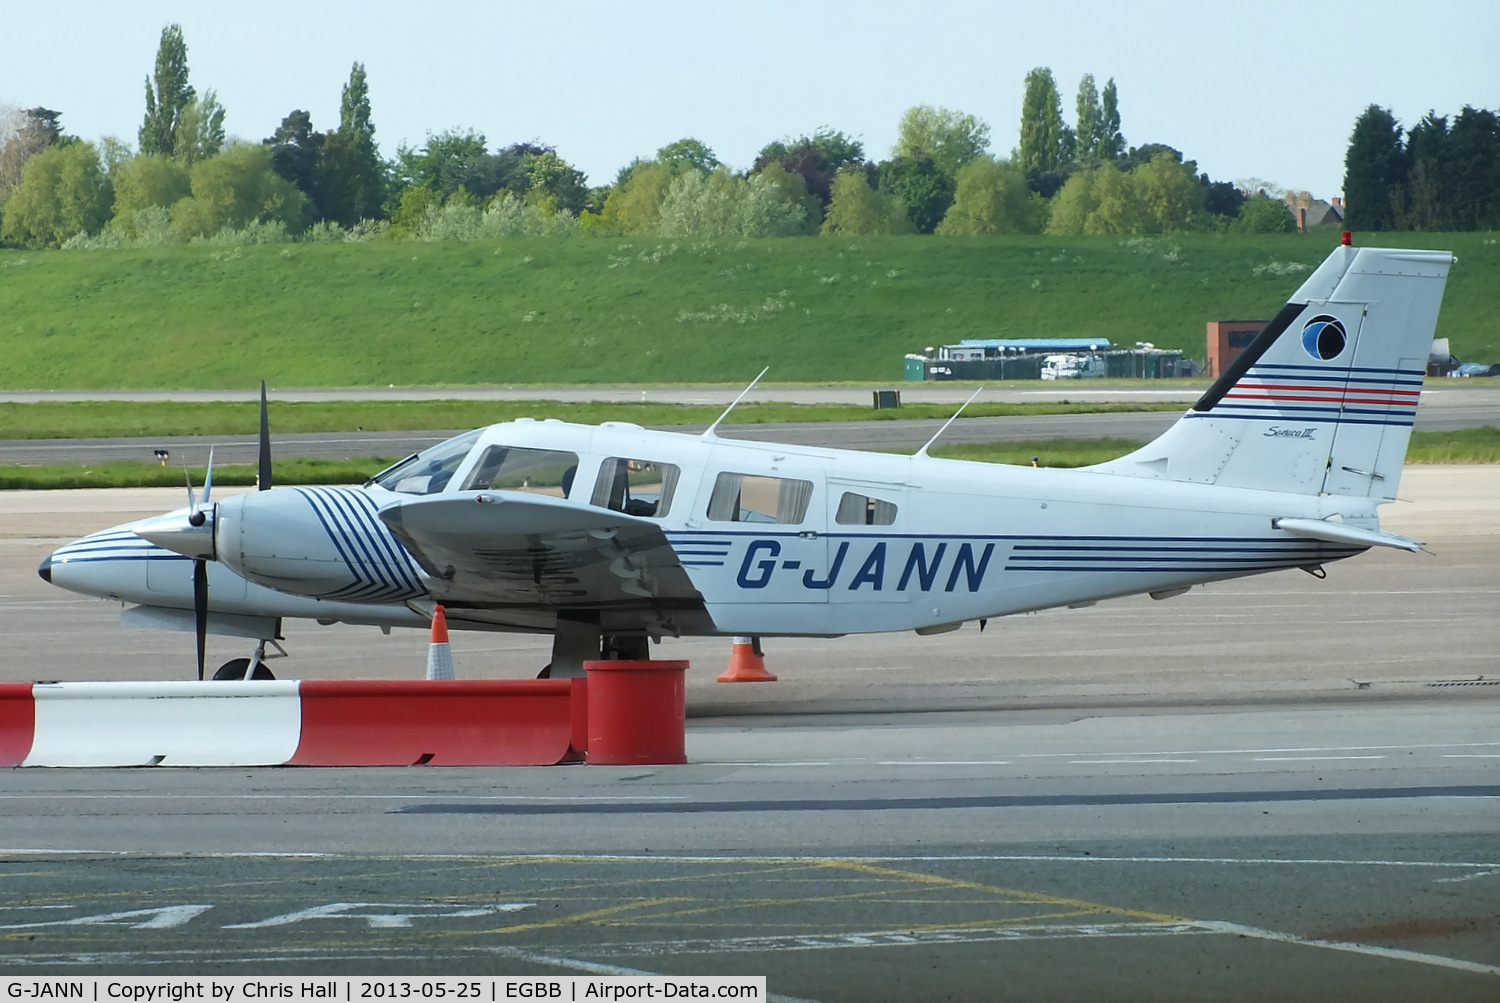 G-JANN, 1988 Piper PA-34-220T Seneca III C/N 34-33133, privately owned